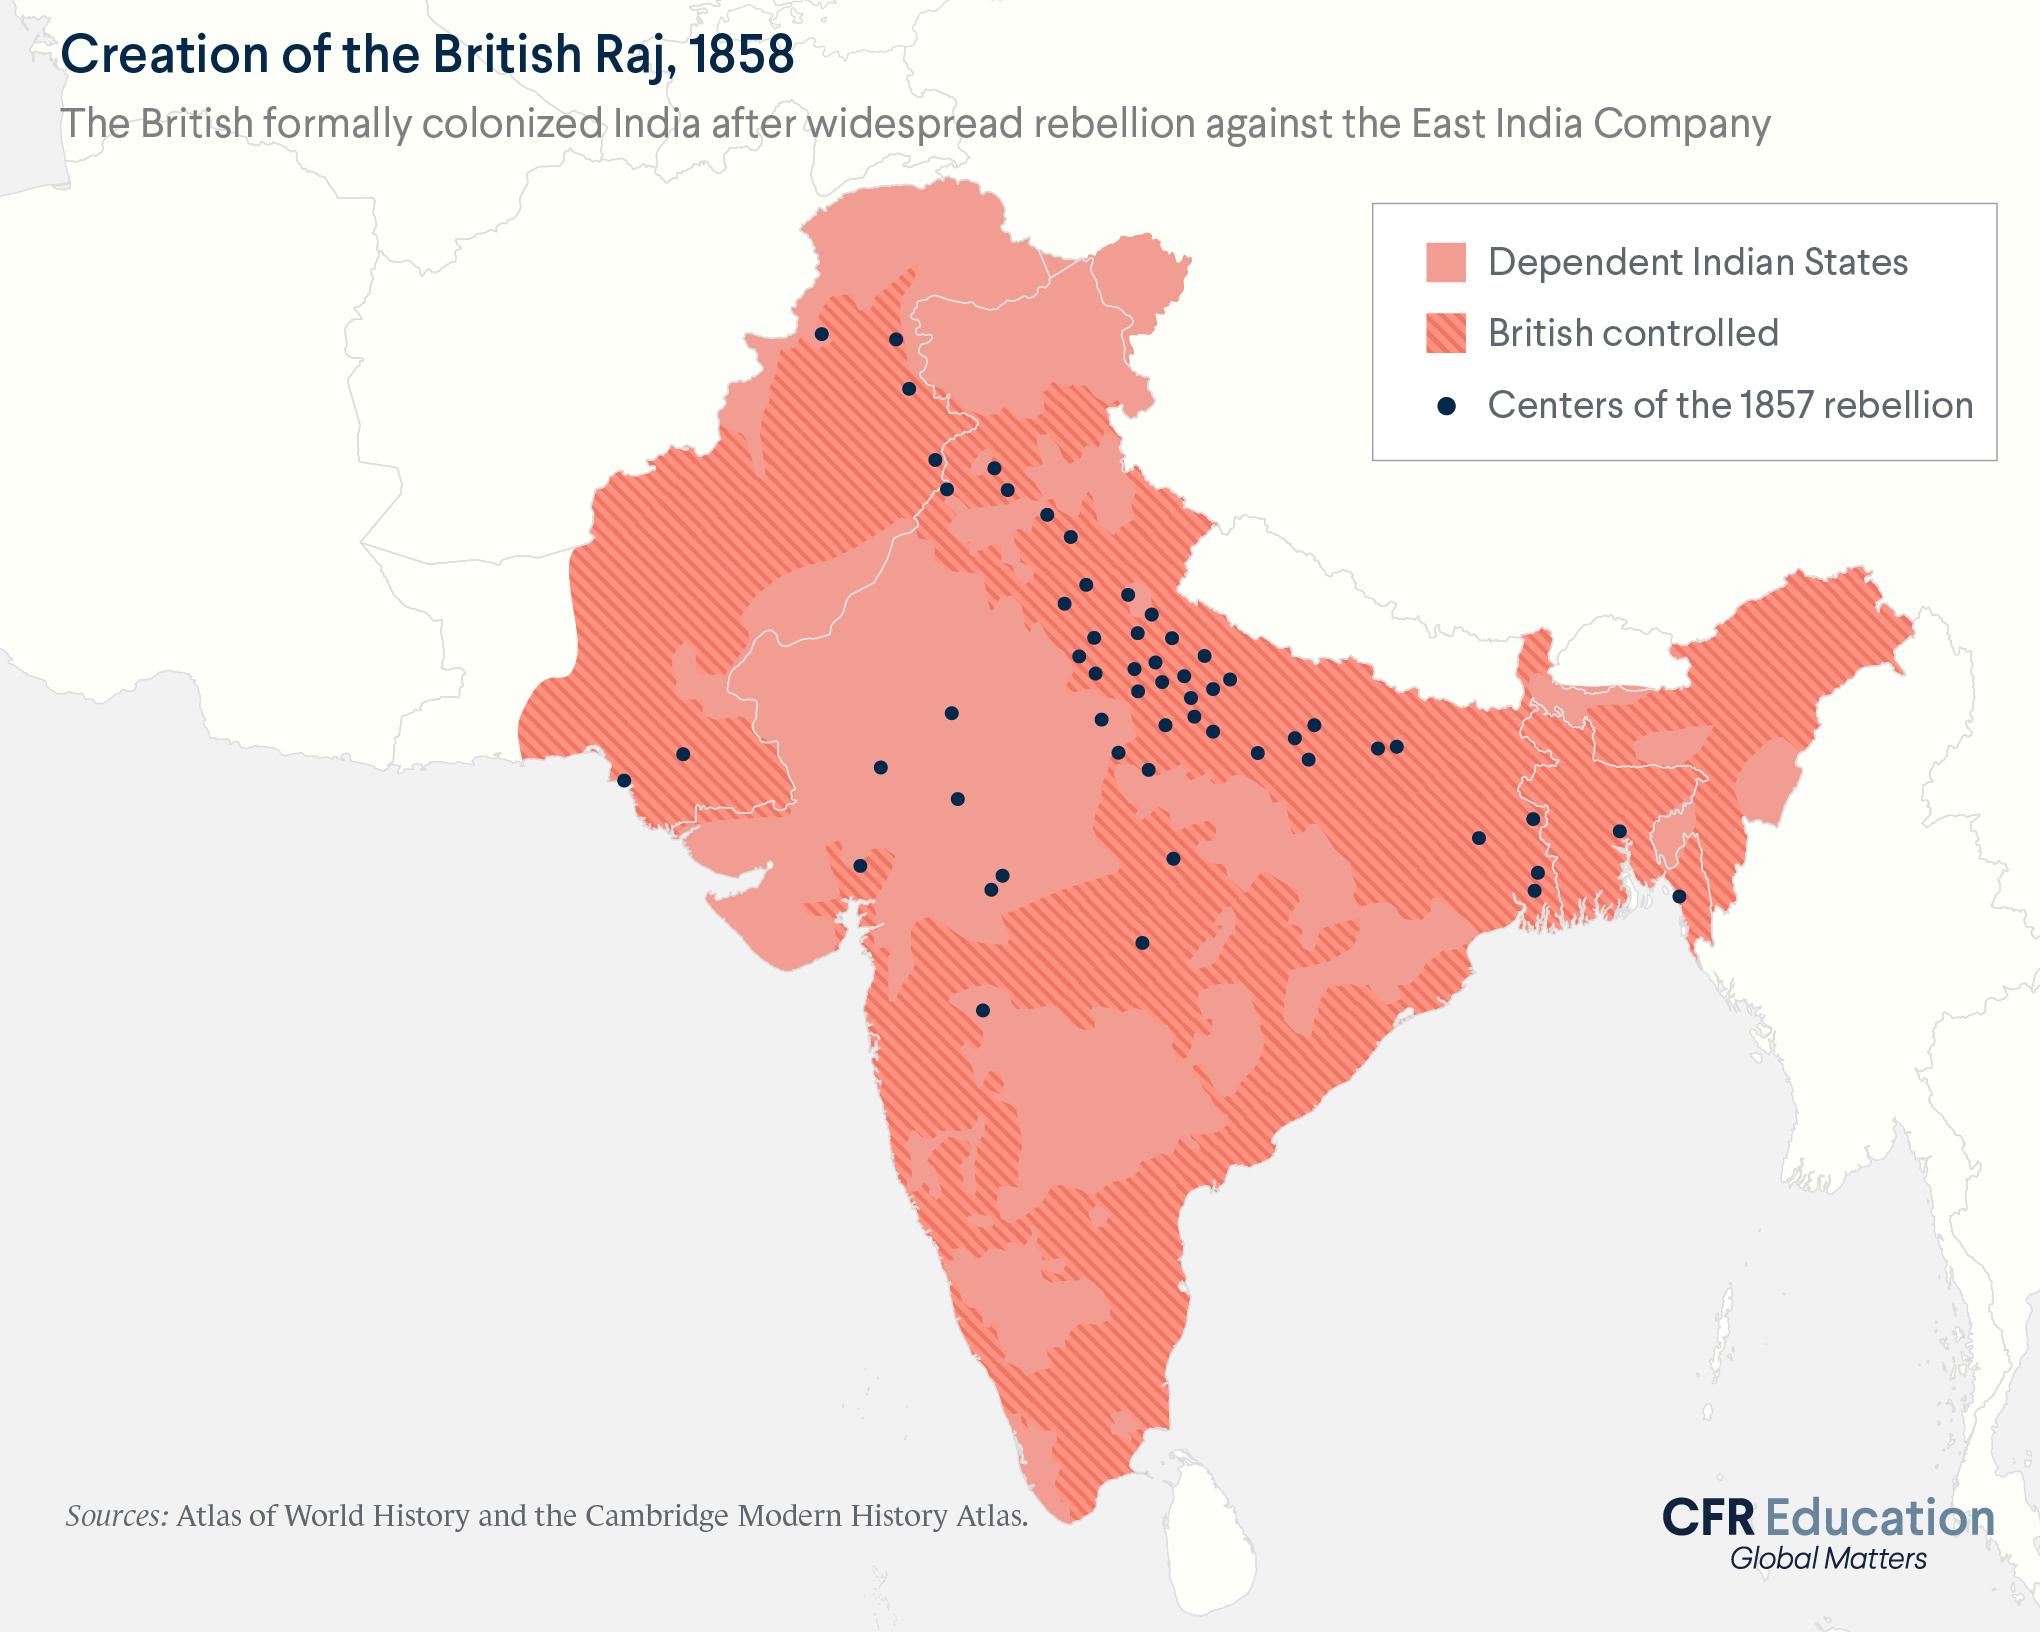 Map shows the centers of the 1857 rebellion and the British Raj in 1858, including British-run areas and dependent Indian states. Sources: Atlas of World History and the Cambridge Modern History Atlas. For more info contact us at cfr_education@cfr.org.